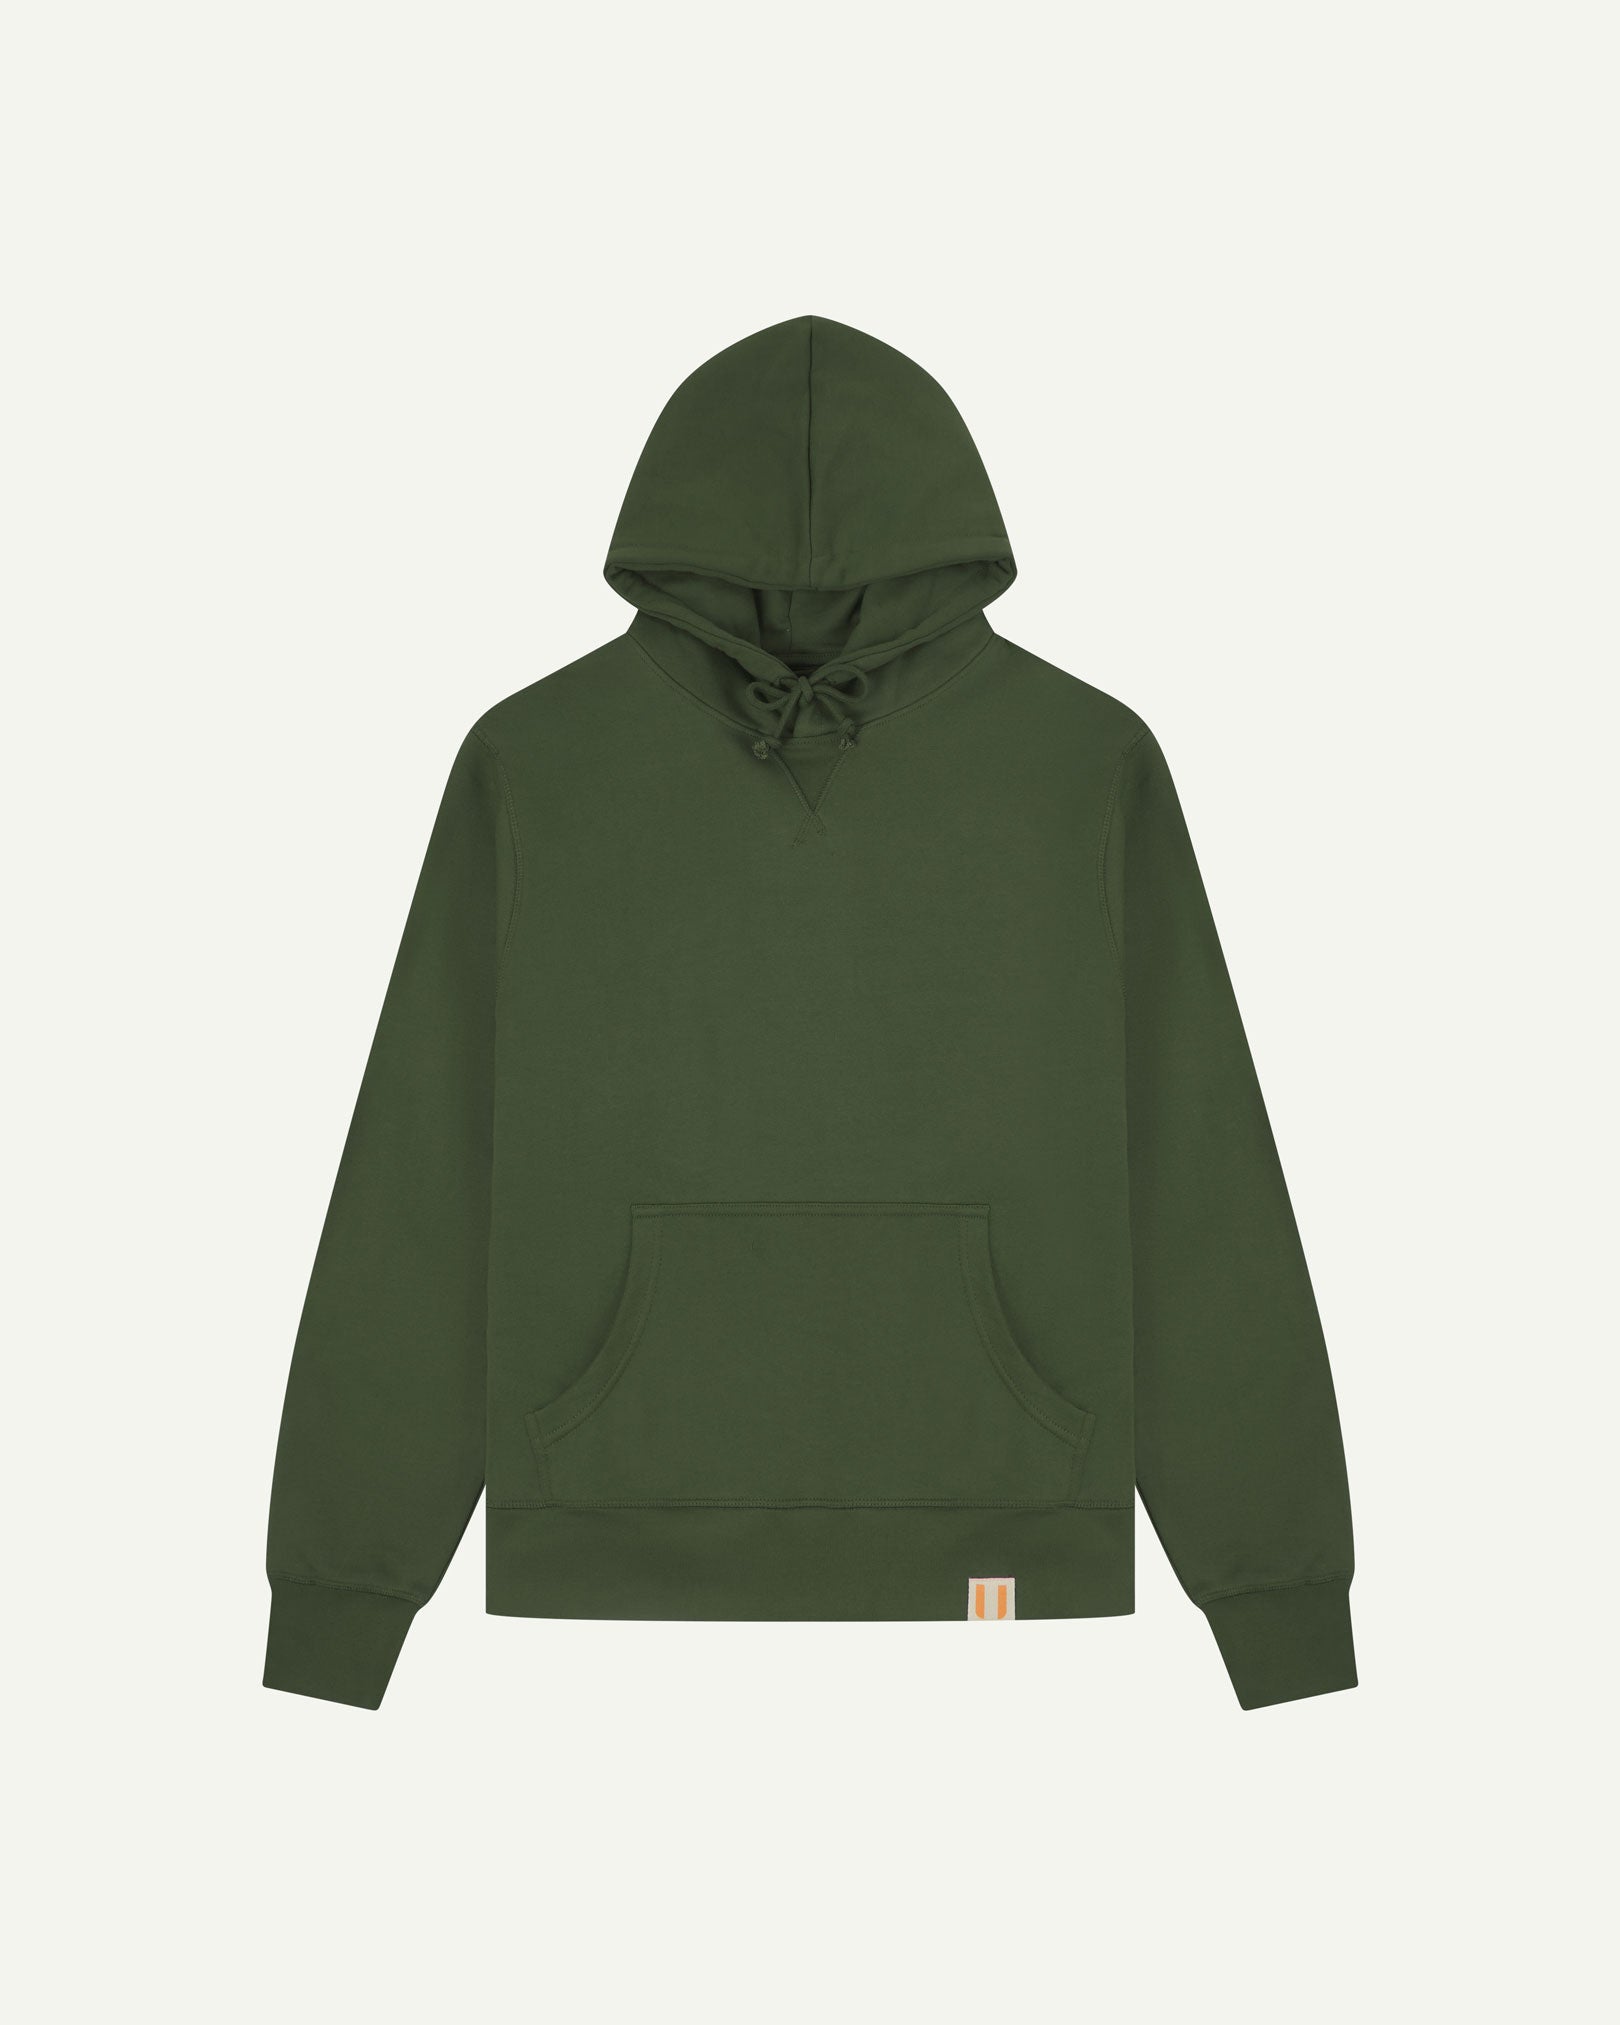 Front flat view of Uskees coriander-green hoodie showing brand logo and kangaroo front pocket.